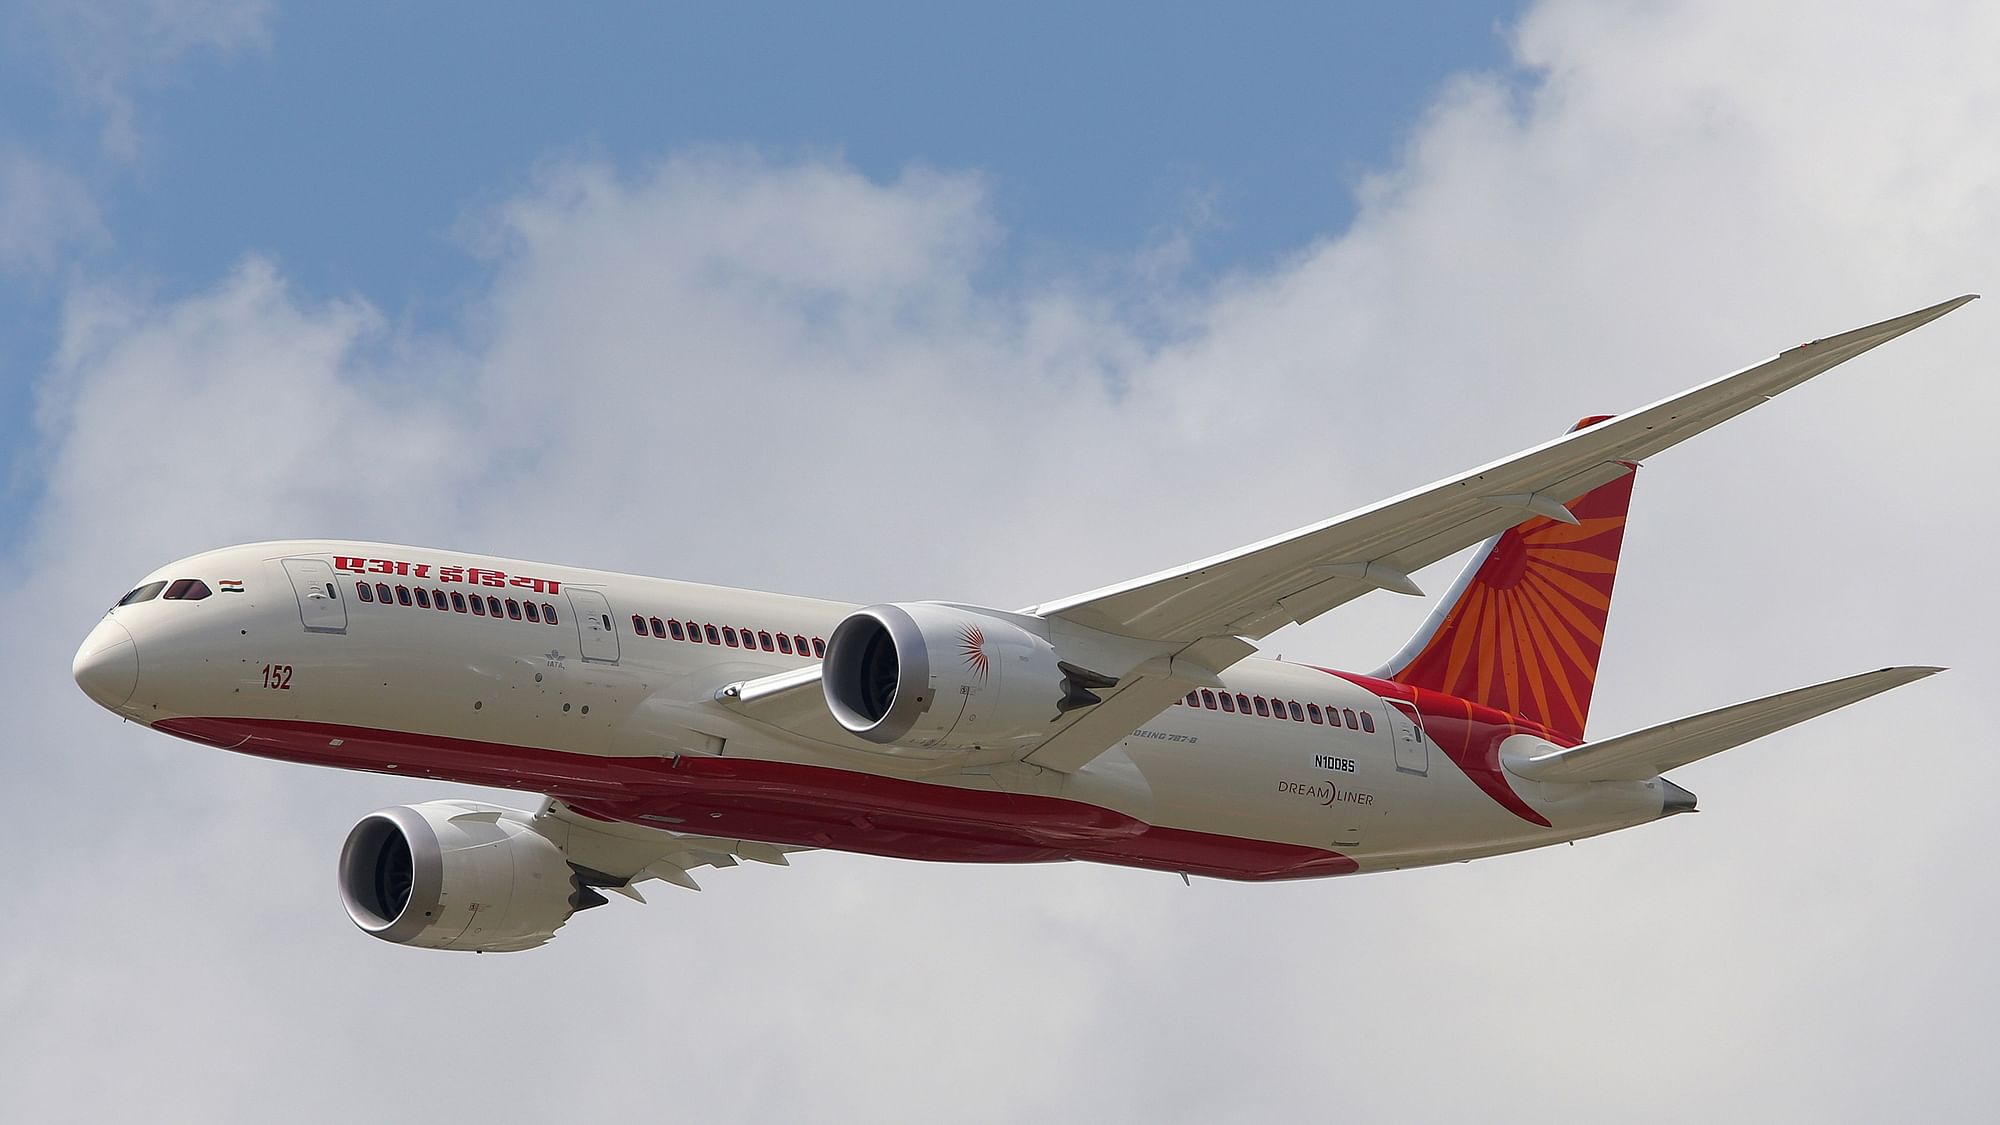 The national carrier Air India.